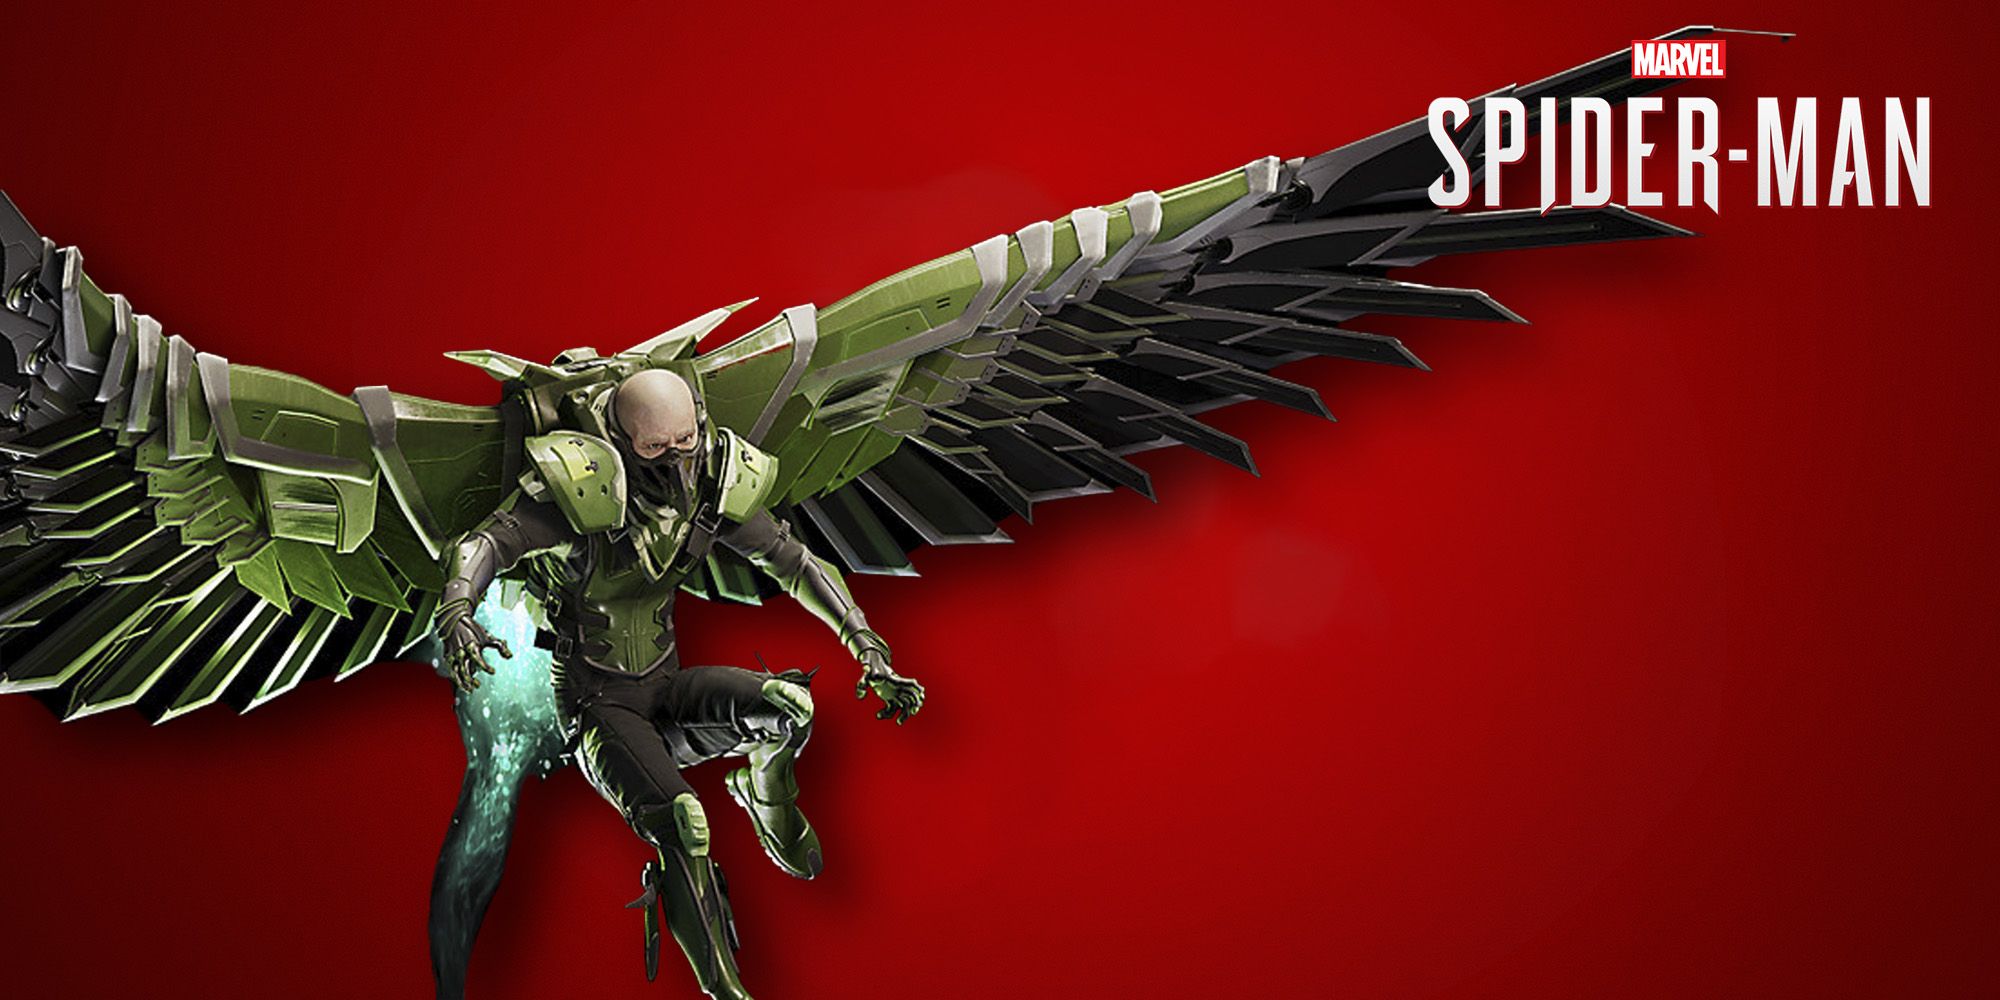 Vulture with his wings spread wide. Spider-Man logo in top right of image. 